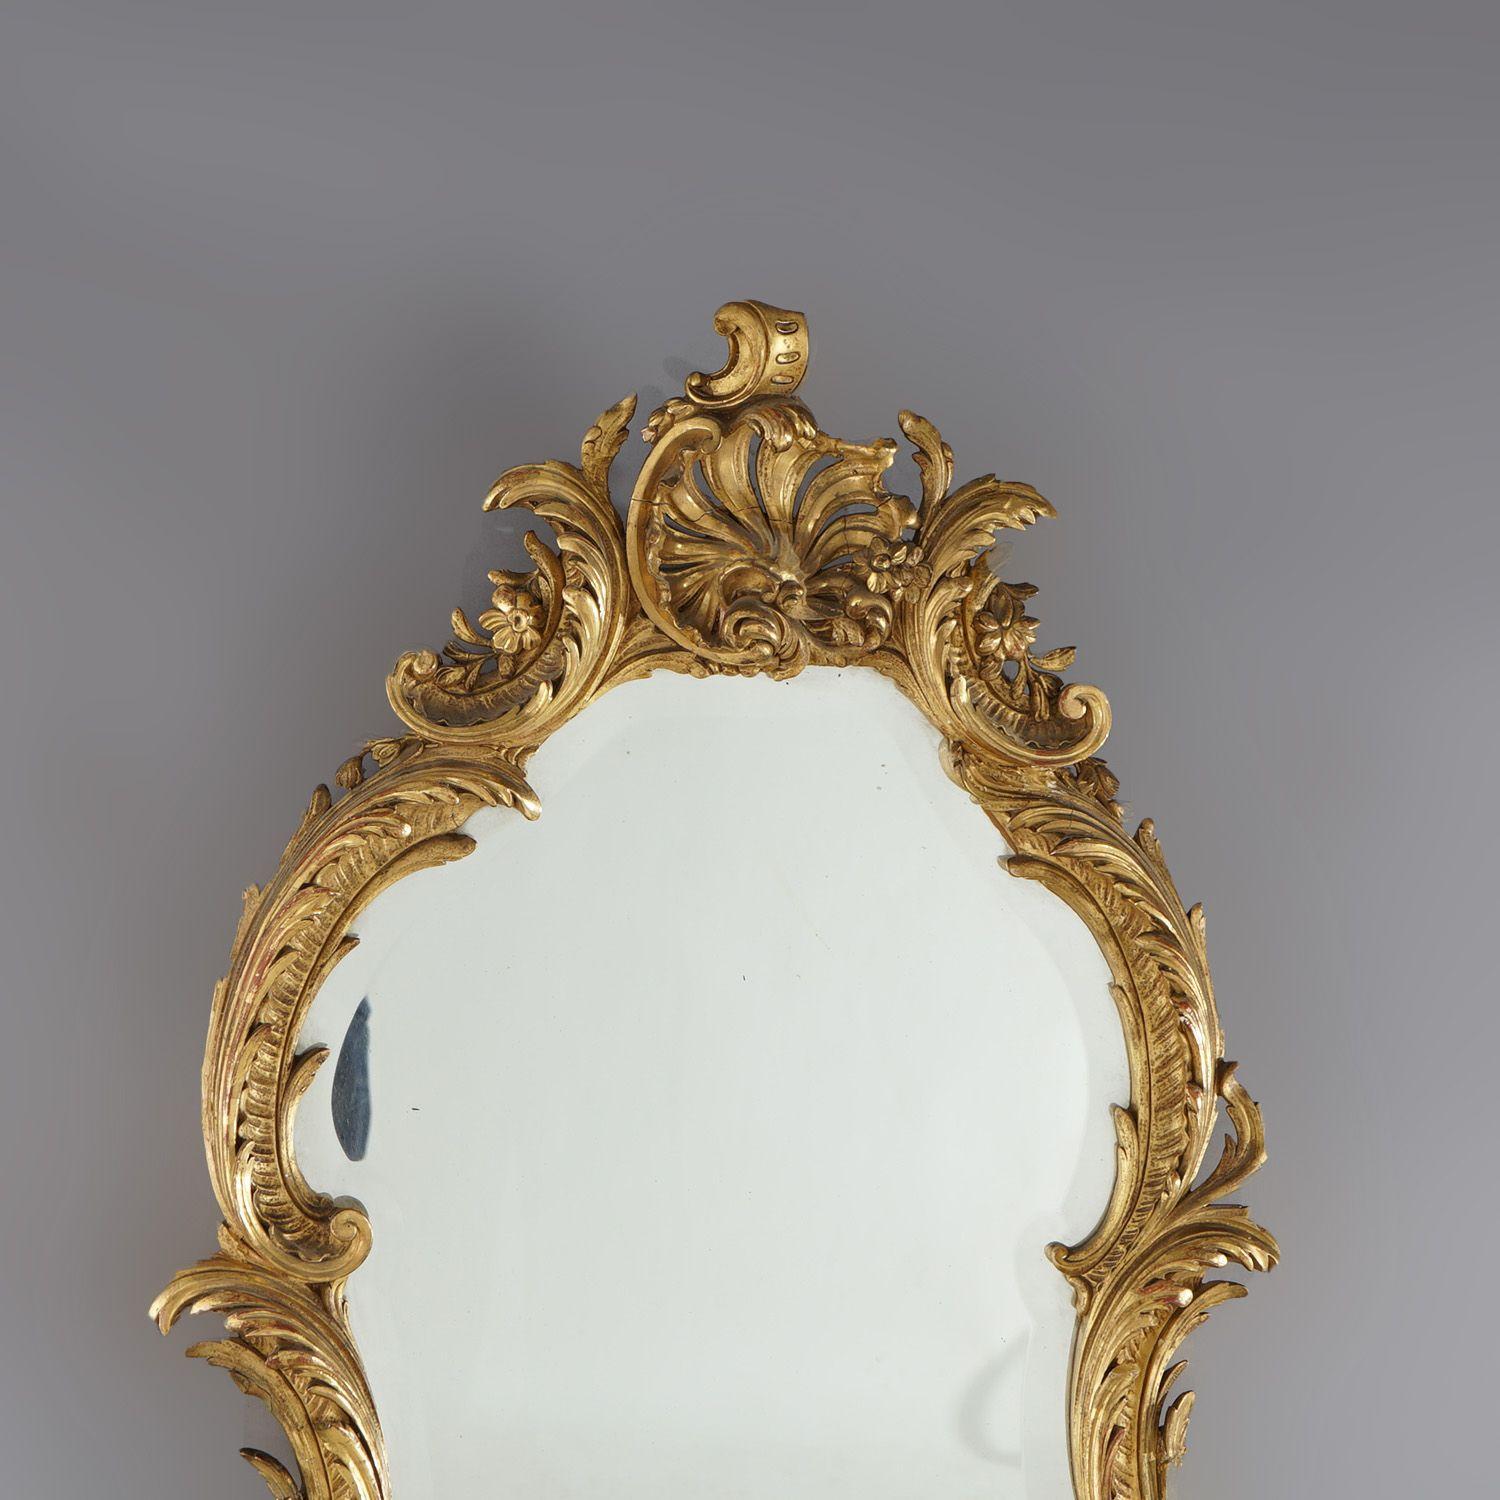 An antique French Louis XIV style wall mirror offers giltwood and gilt plaster construction in foliate form with exaggerated foliate form cartouche, 19th century

Measures - 46.5